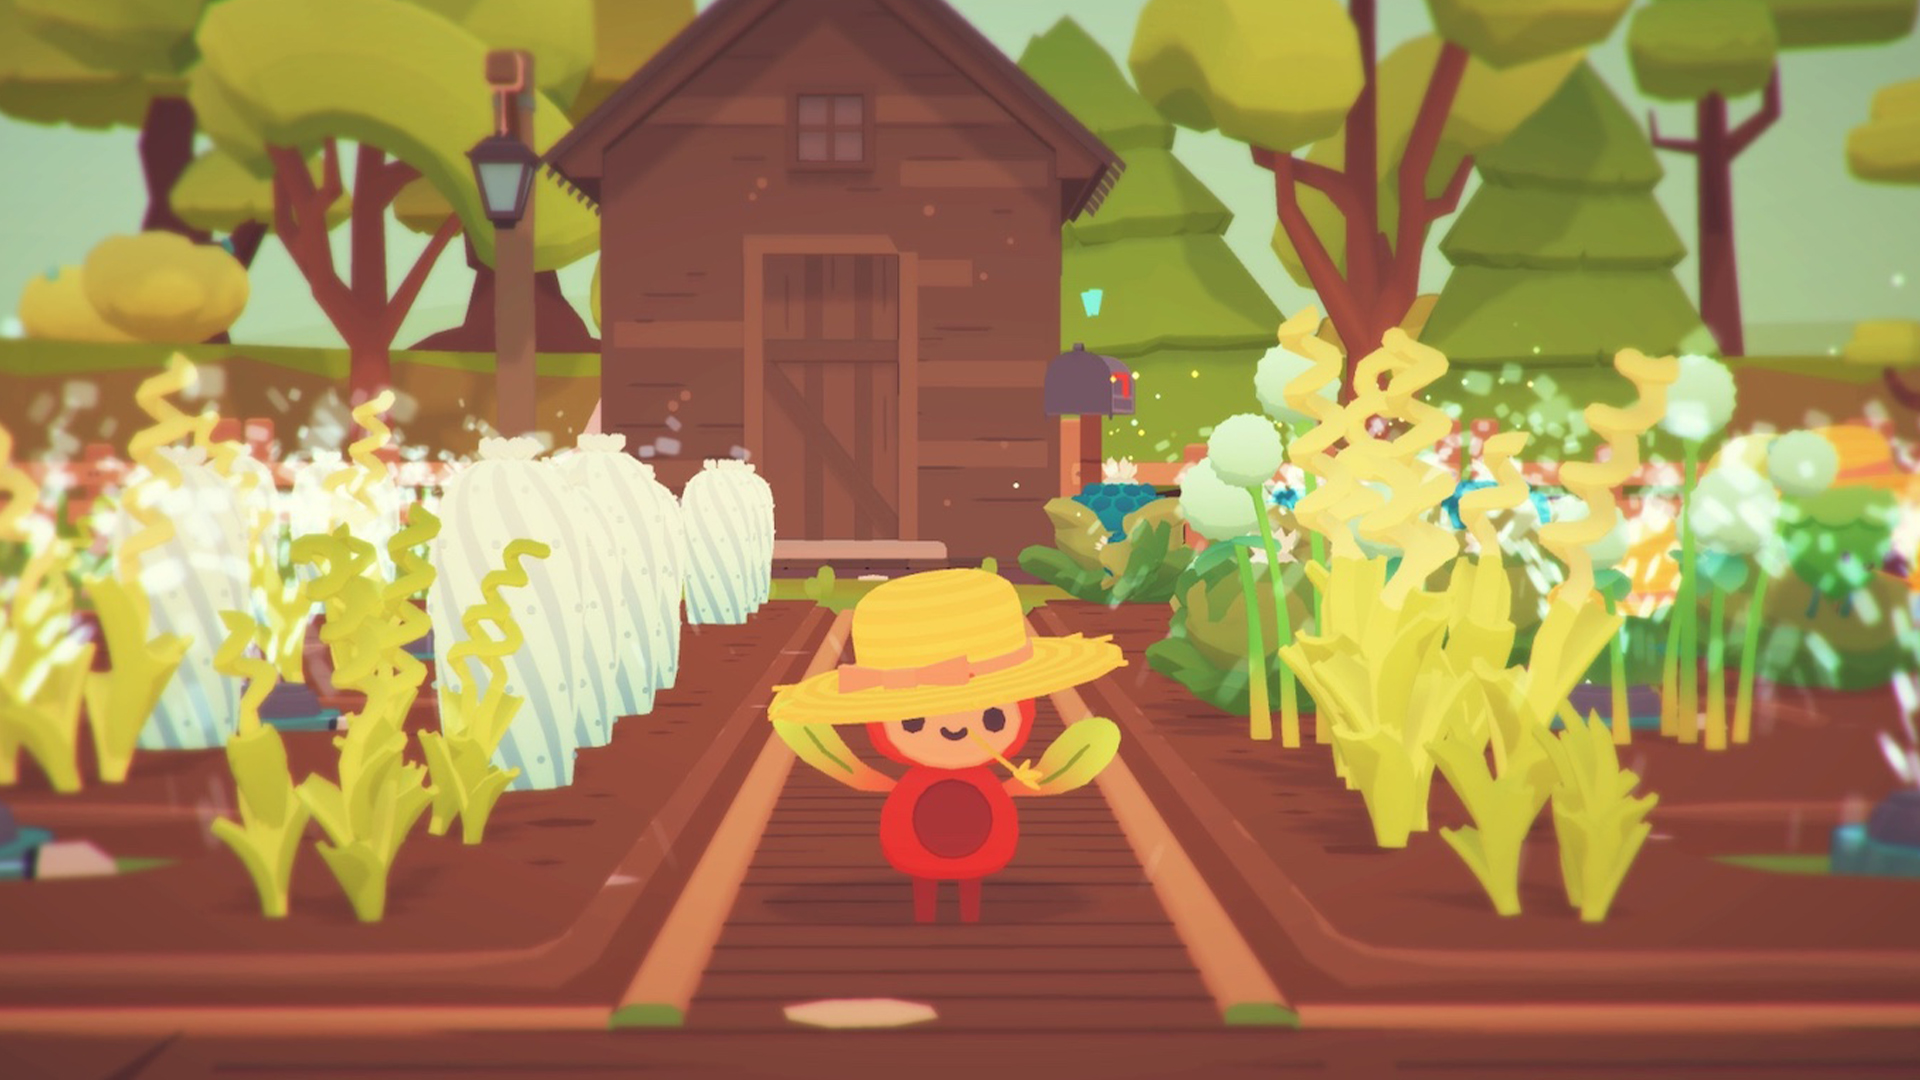 Ooblets's Profile 